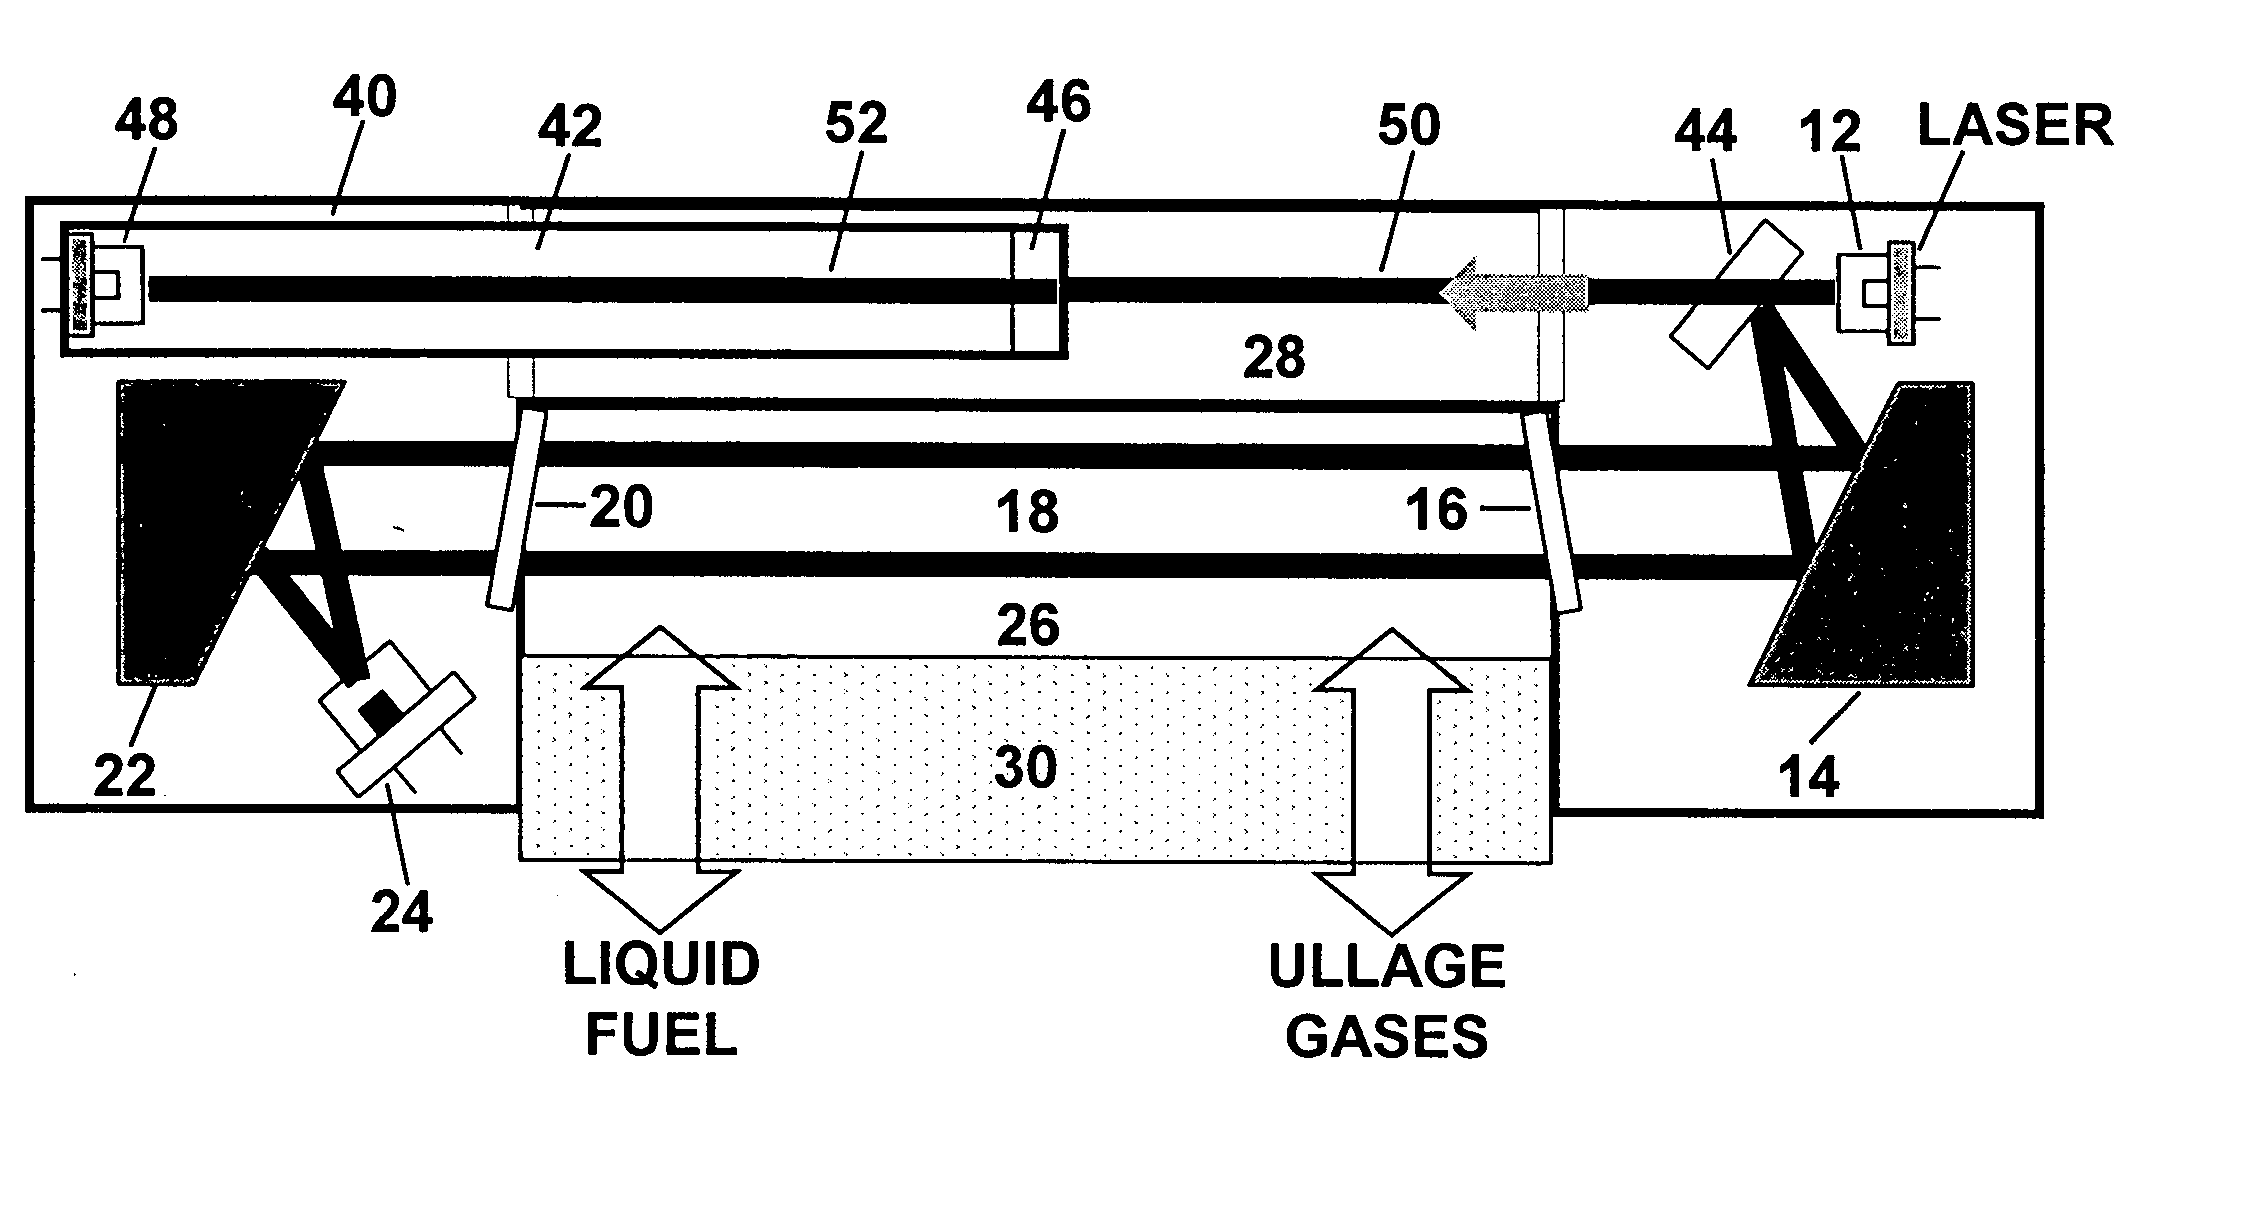 Oxygen sensor for aircraft fuel inerting systems